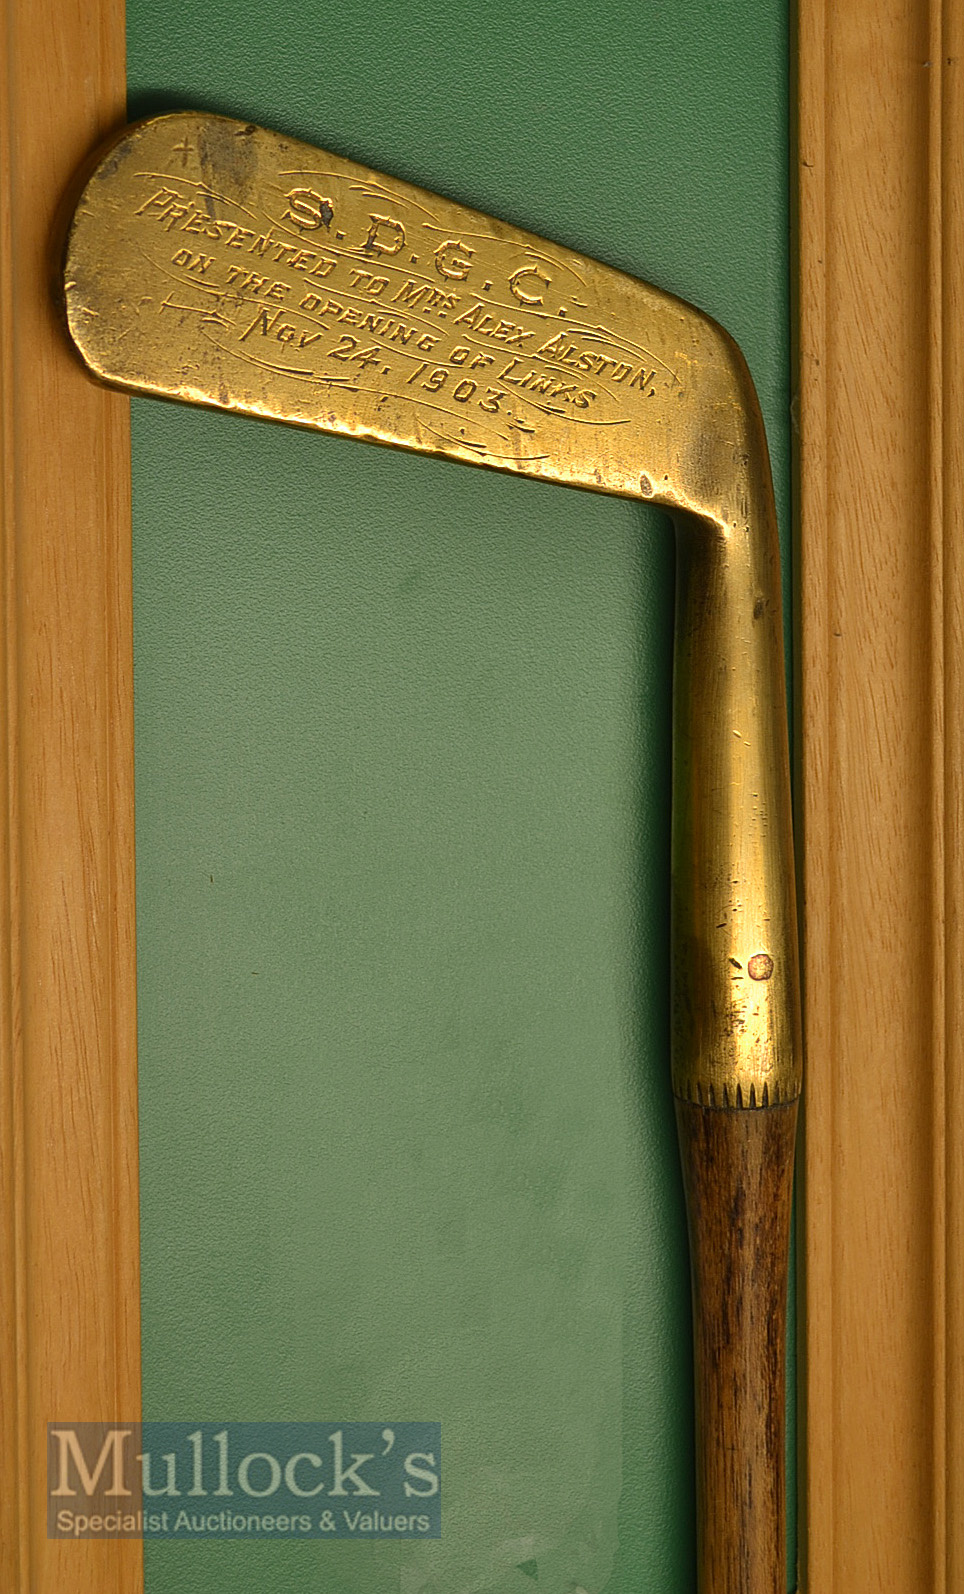 1903 S D G C Presentation brass blade putter Engraved ‘S D G C Presented to Mrs Alex Alston on the